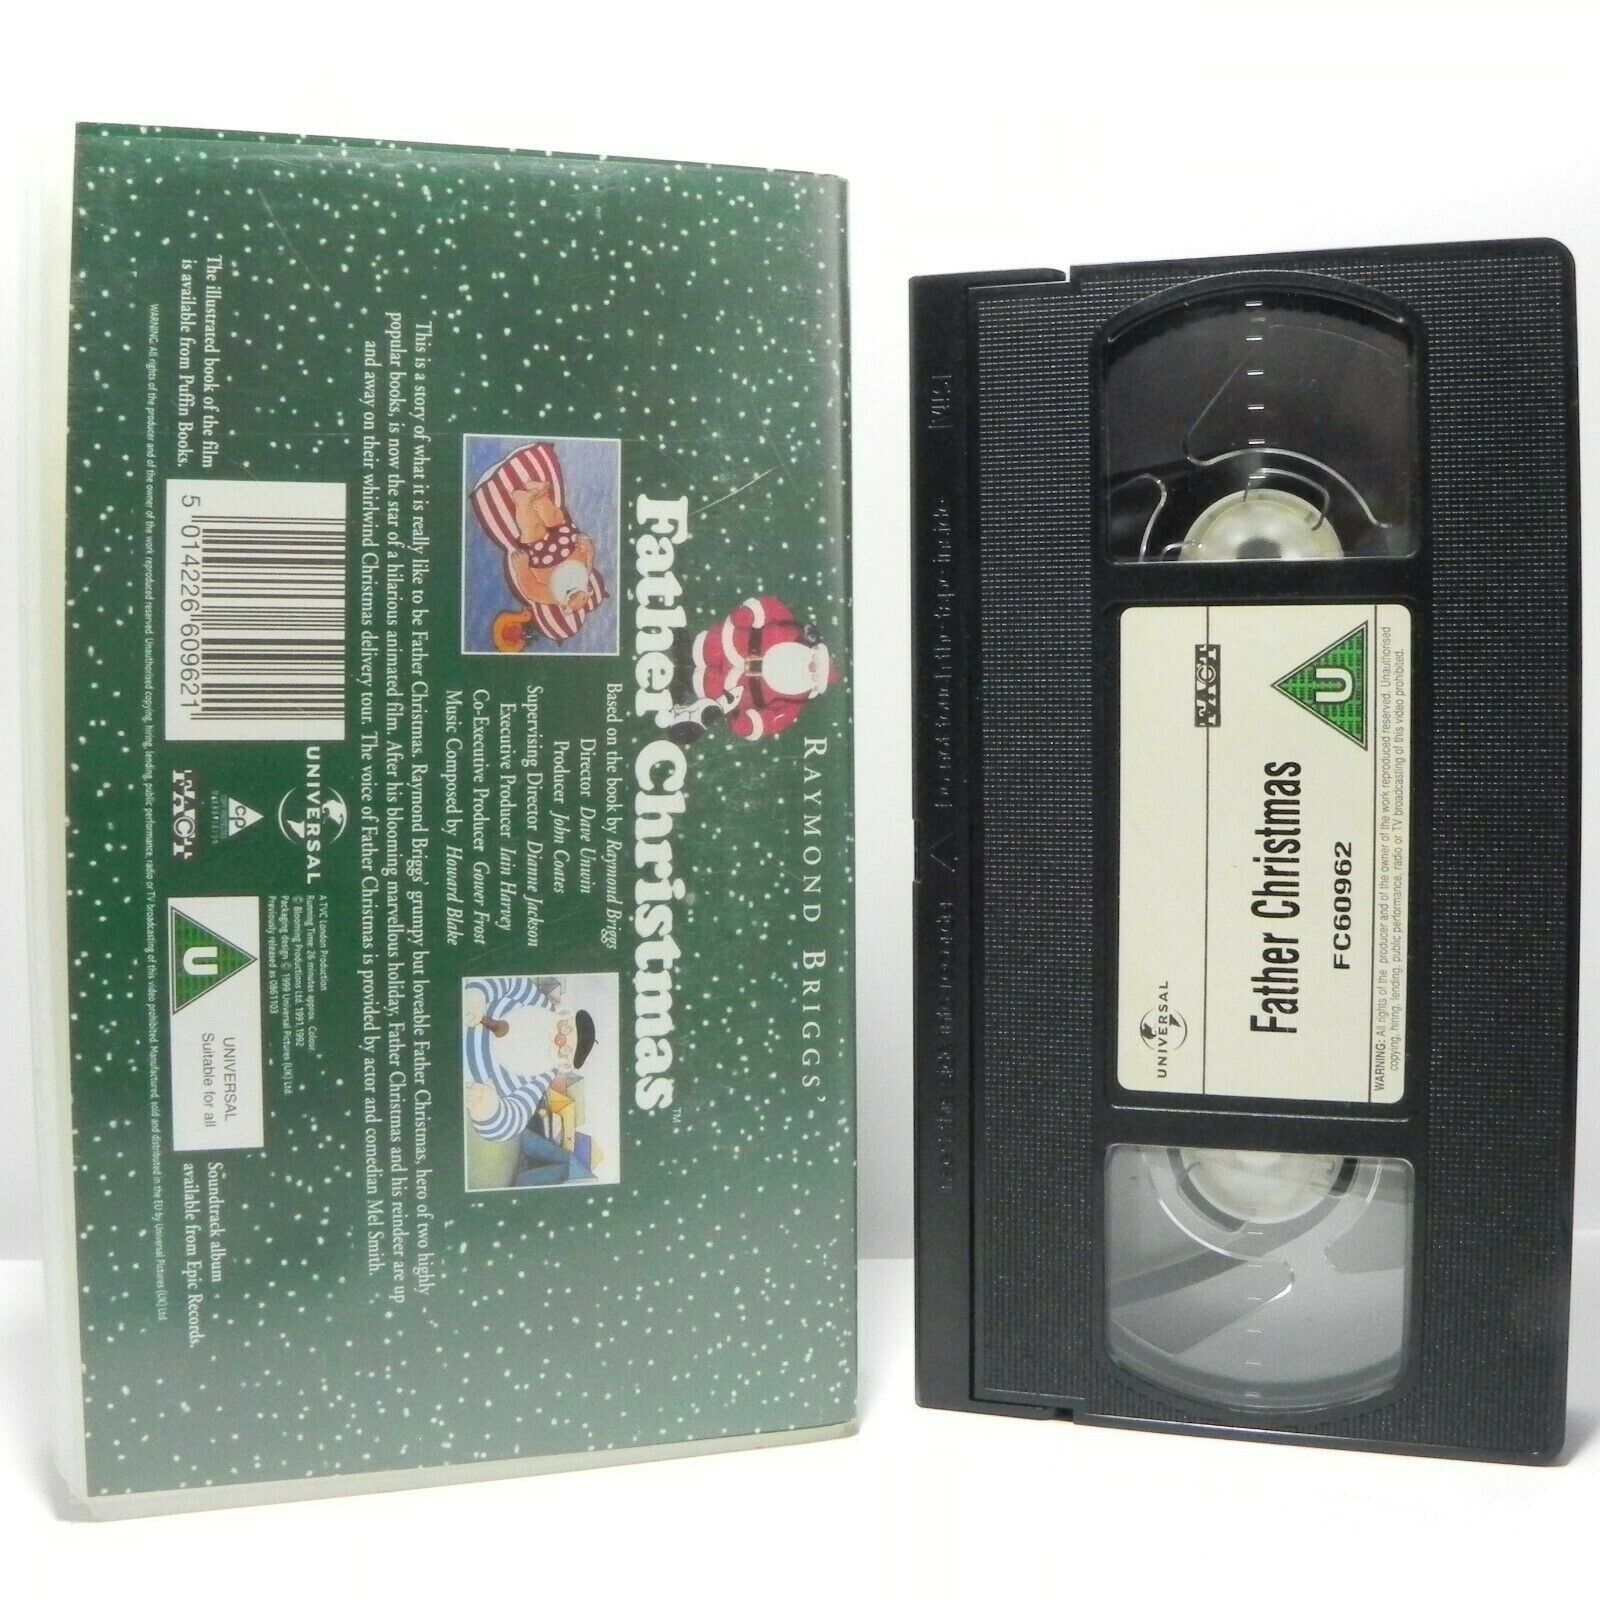 Father Christmas: By Raymond Brigs - Hilarious Animated Film - Children's - VHS-